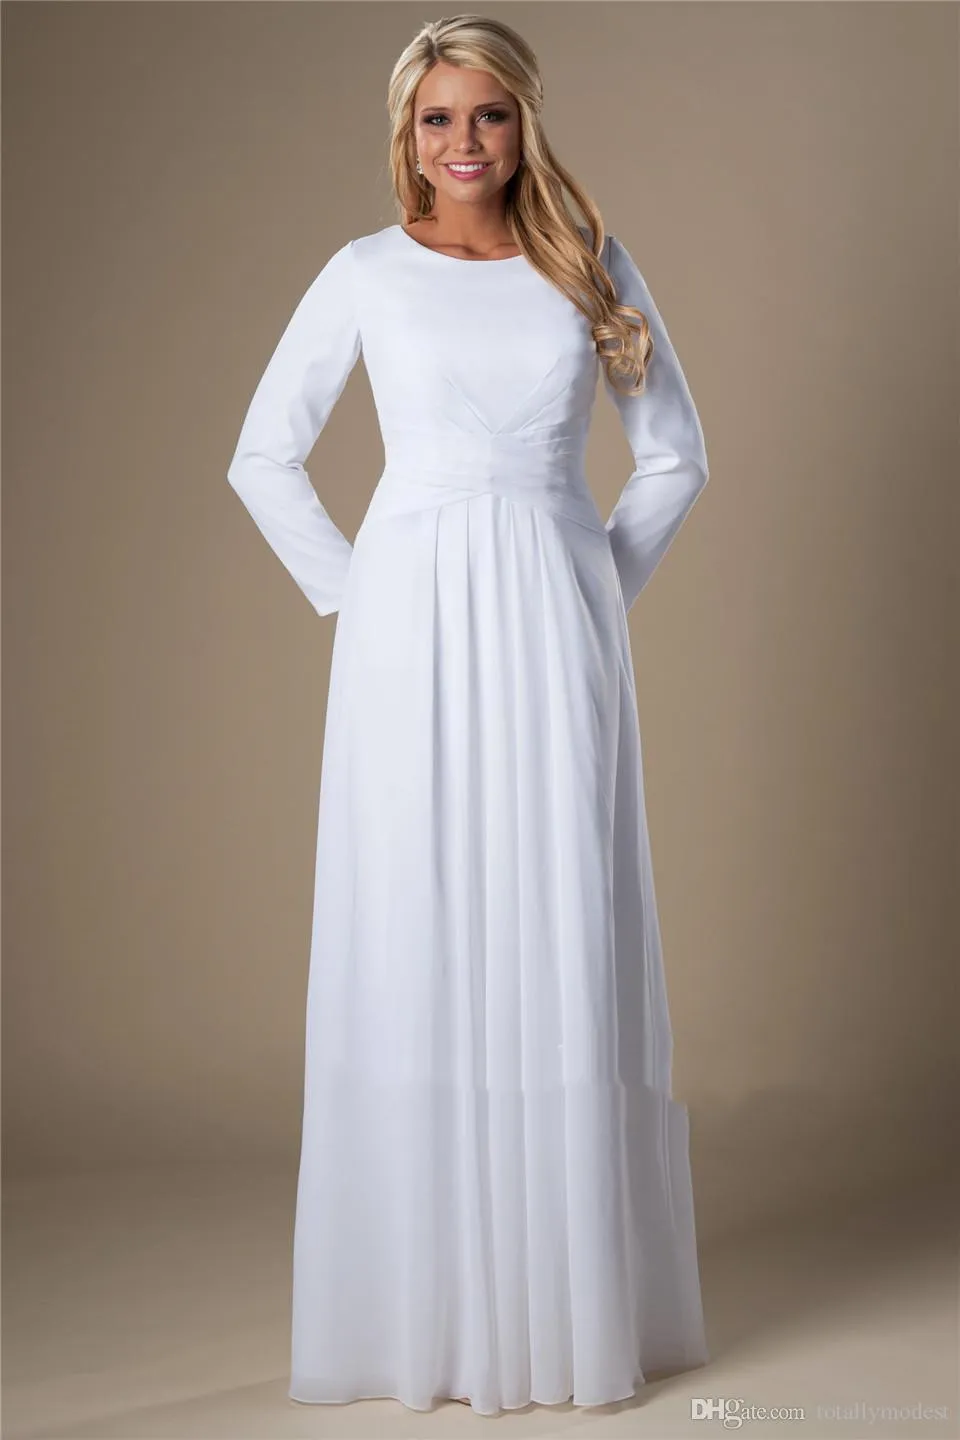 Modest A Line Chiffon Midi Wedding Guest Dress With Long Sleeves ...